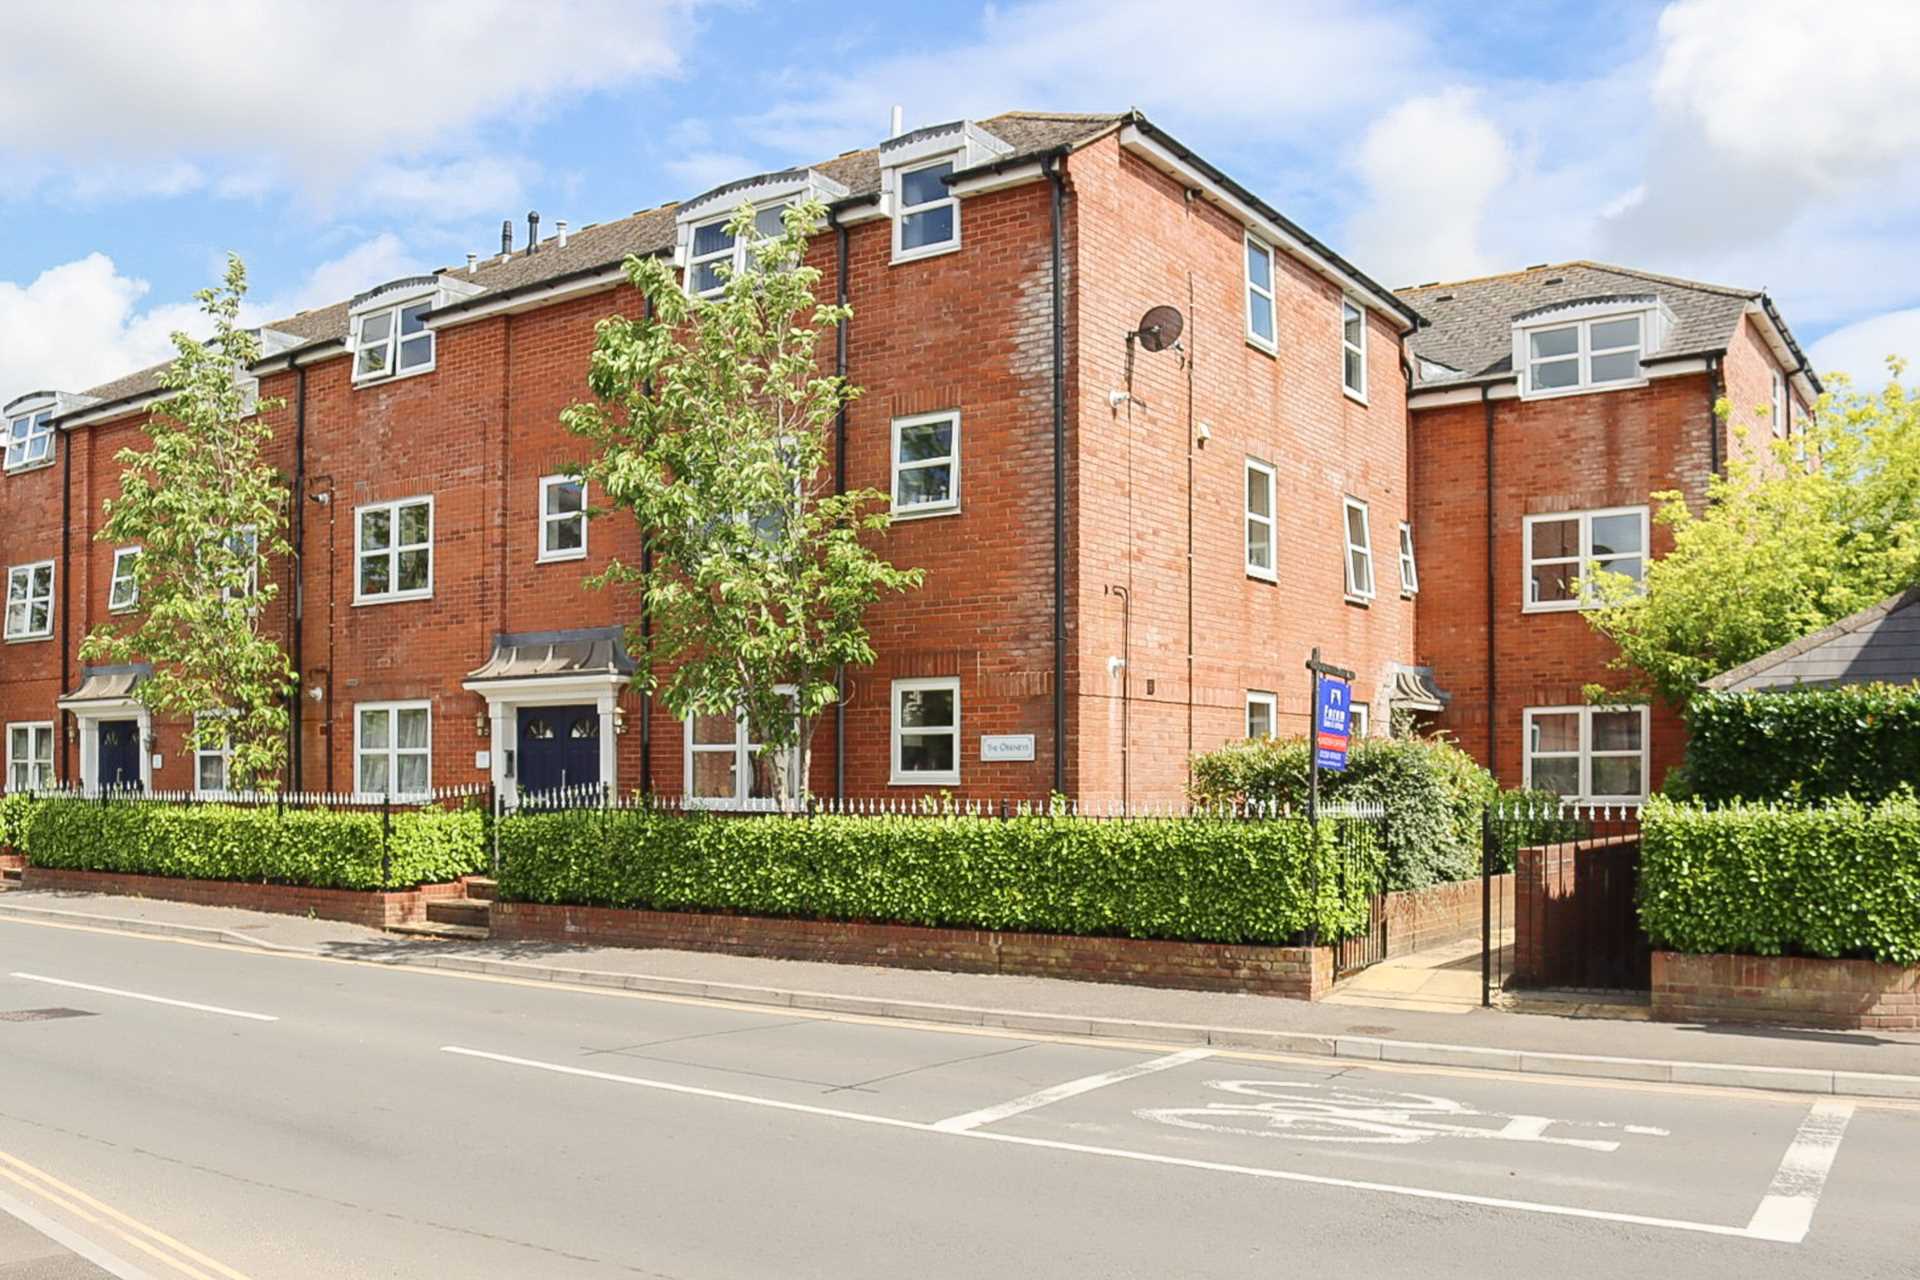 2 bed flat for sale in The Orkneys, Blandford Forum, Blandford Forum  - Property Image 1